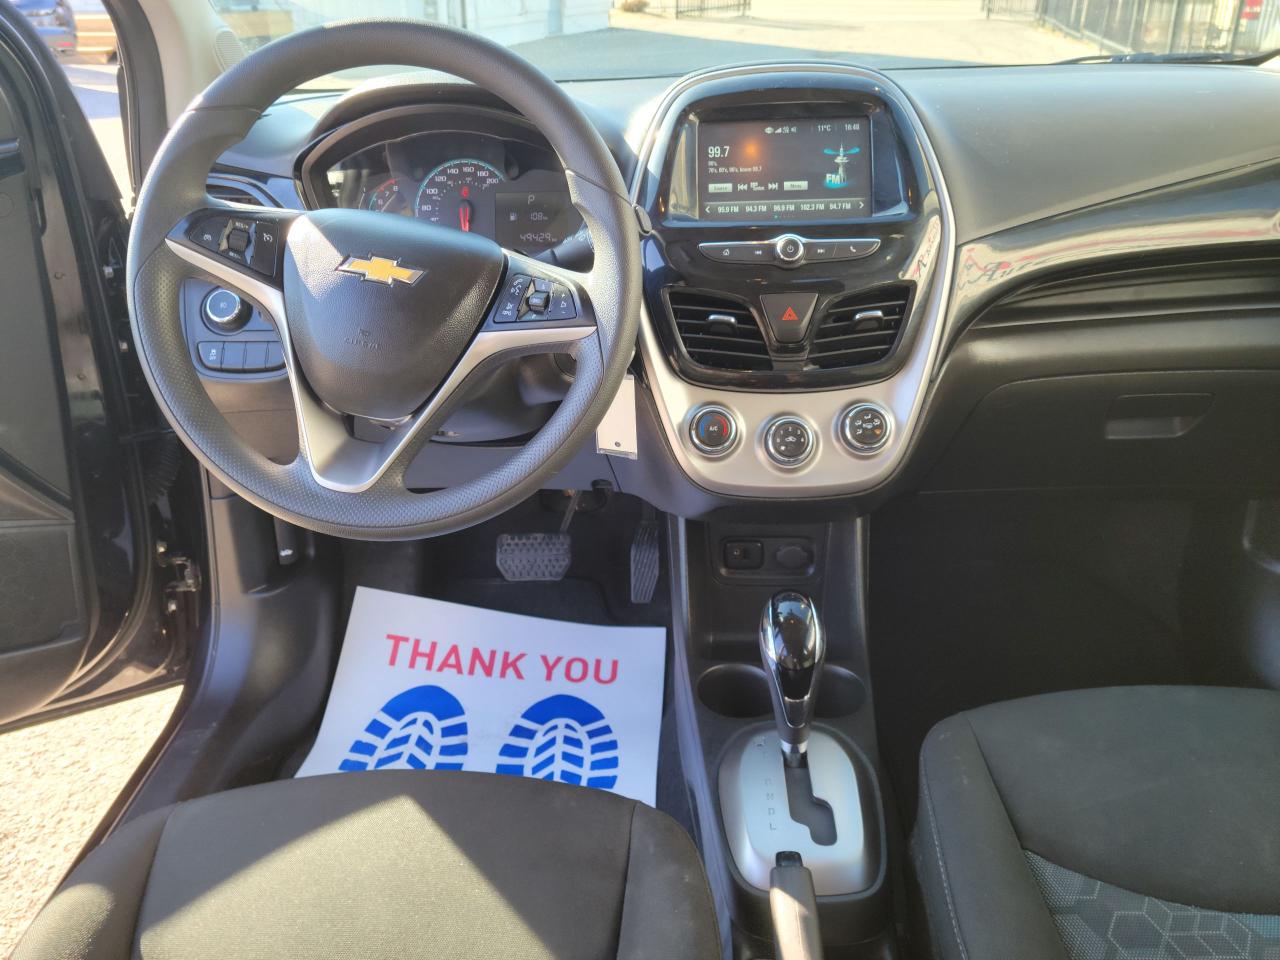 2018 Chevrolet Spark LT  , Low kms Only 49000 - Photo #10